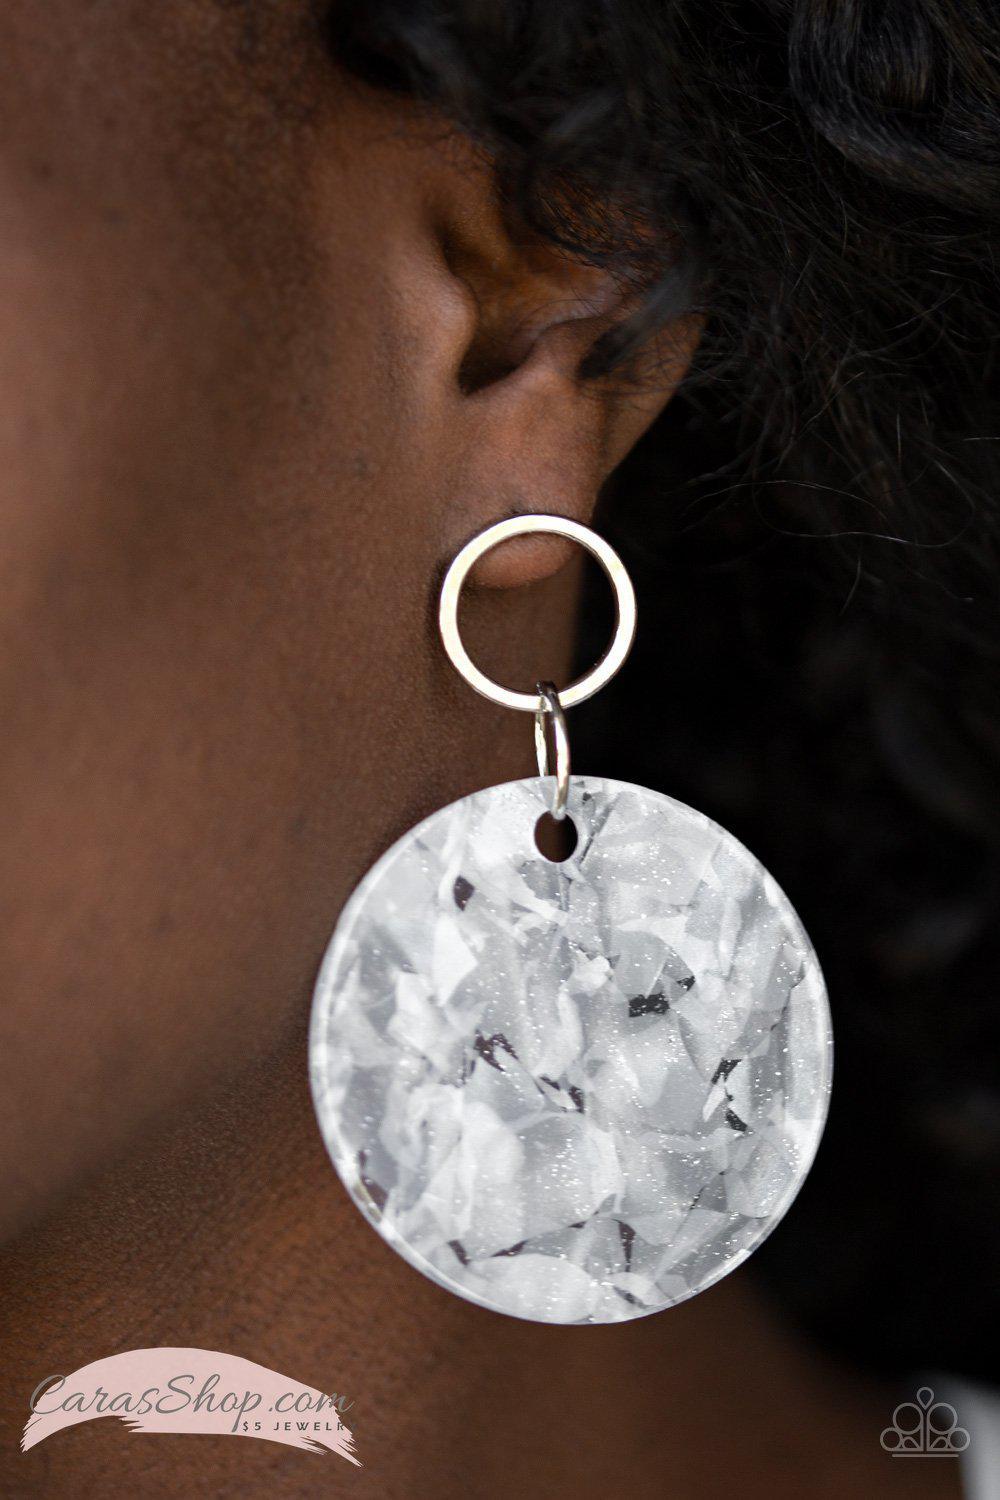 Beach Bliss White Acrylic Post Earrings - Paparazzi Accessories-CarasShop.com - $5 Jewelry by Cara Jewels